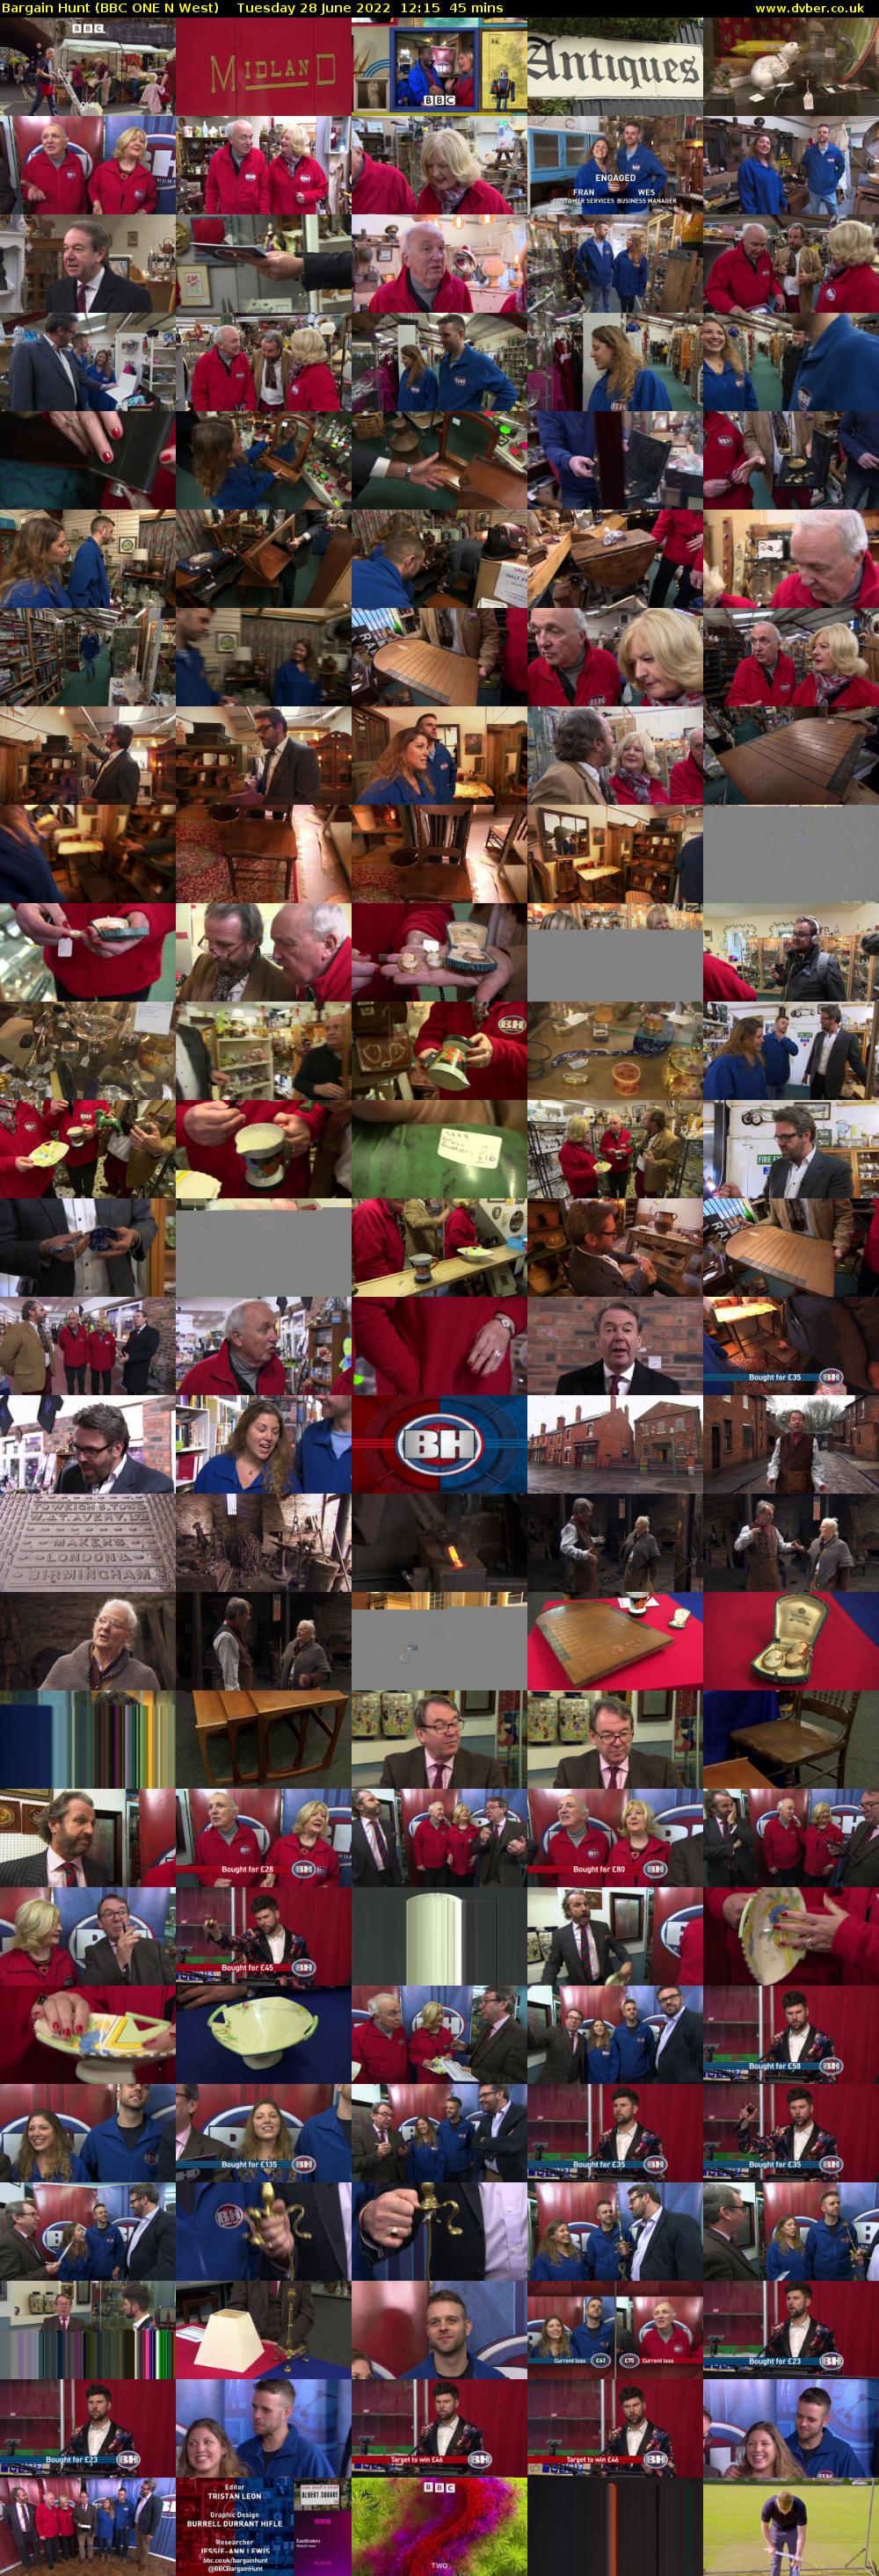 Bargain Hunt (BBC ONE N West) Tuesday 28 June 2022 12:15 - 13:00